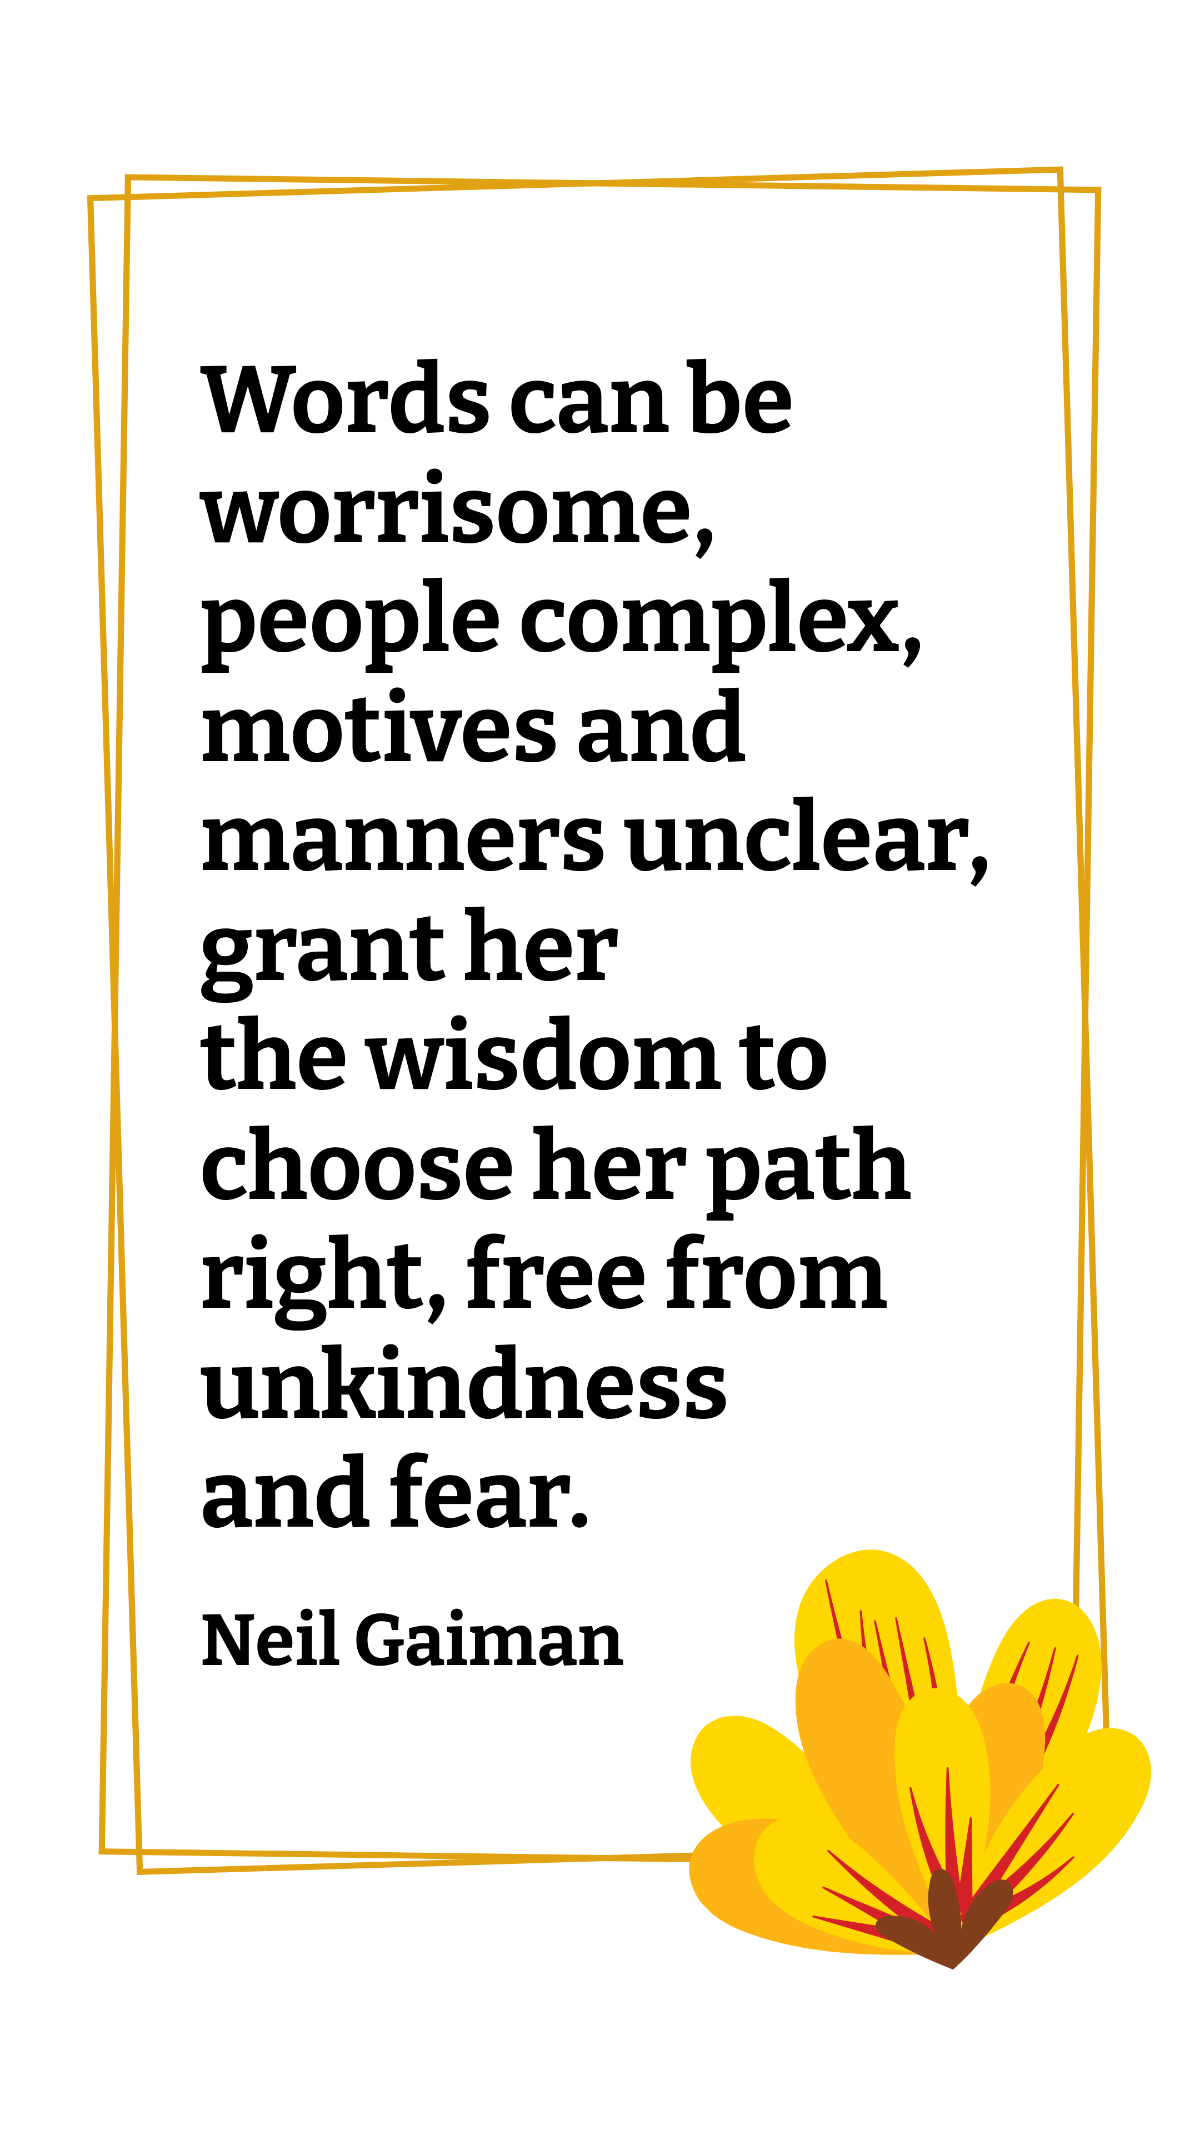 Neil Gaiman - Words can be worrisome, people complex, motives and manners unclear, grant her the wisdom to choose her path right, from unkindness and fear. Template